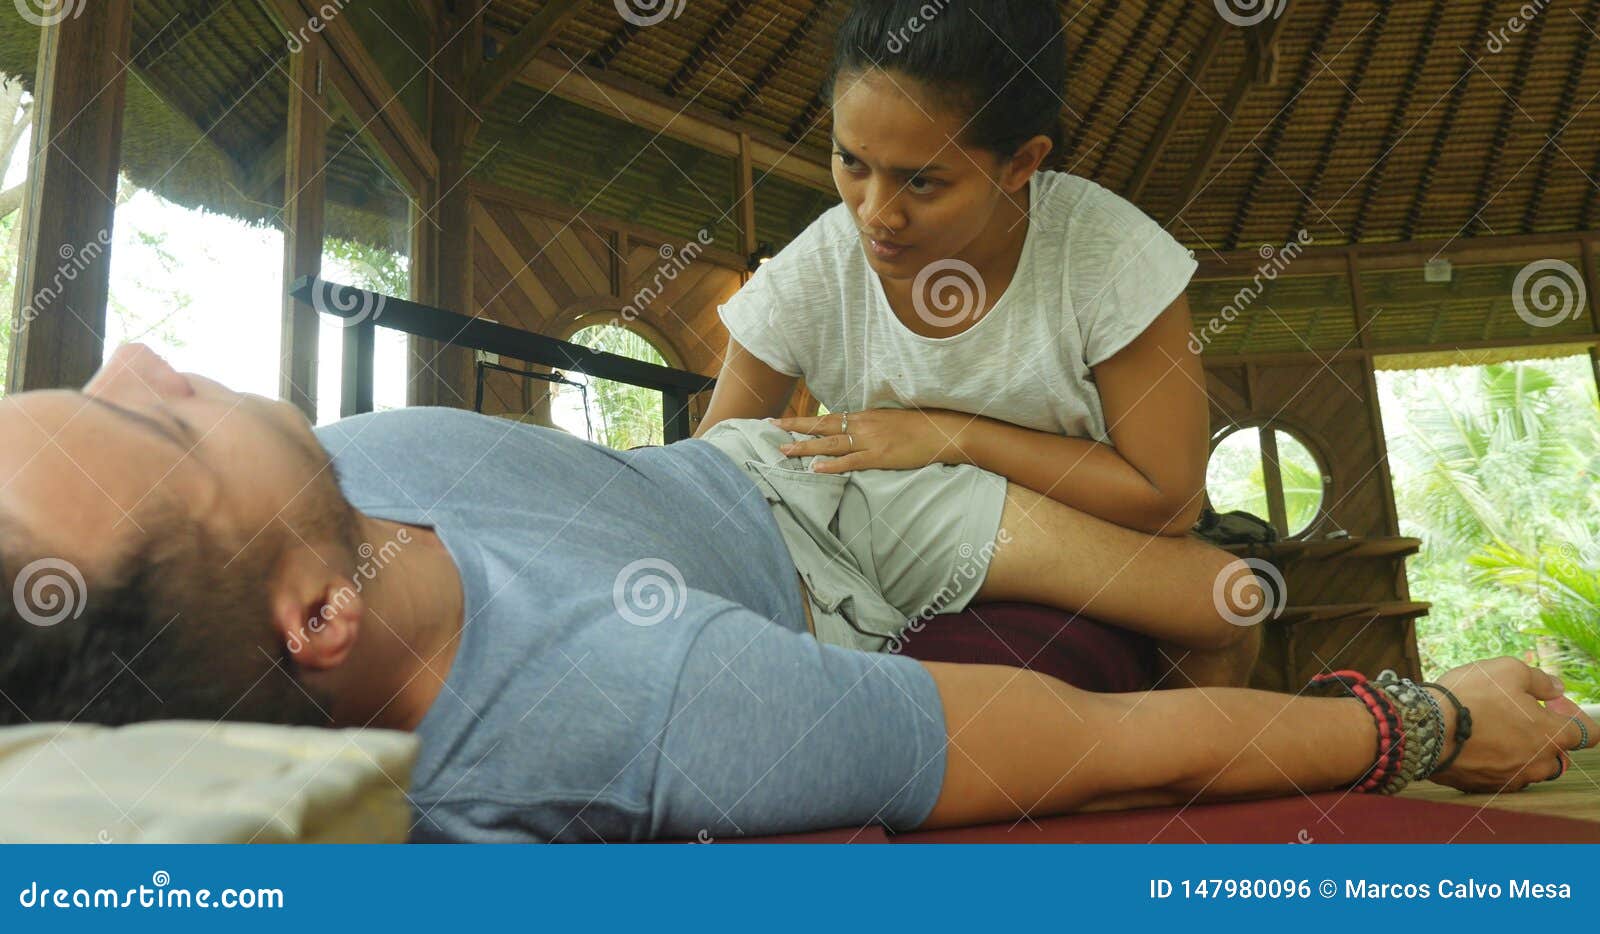 exotic asian girls getting massages